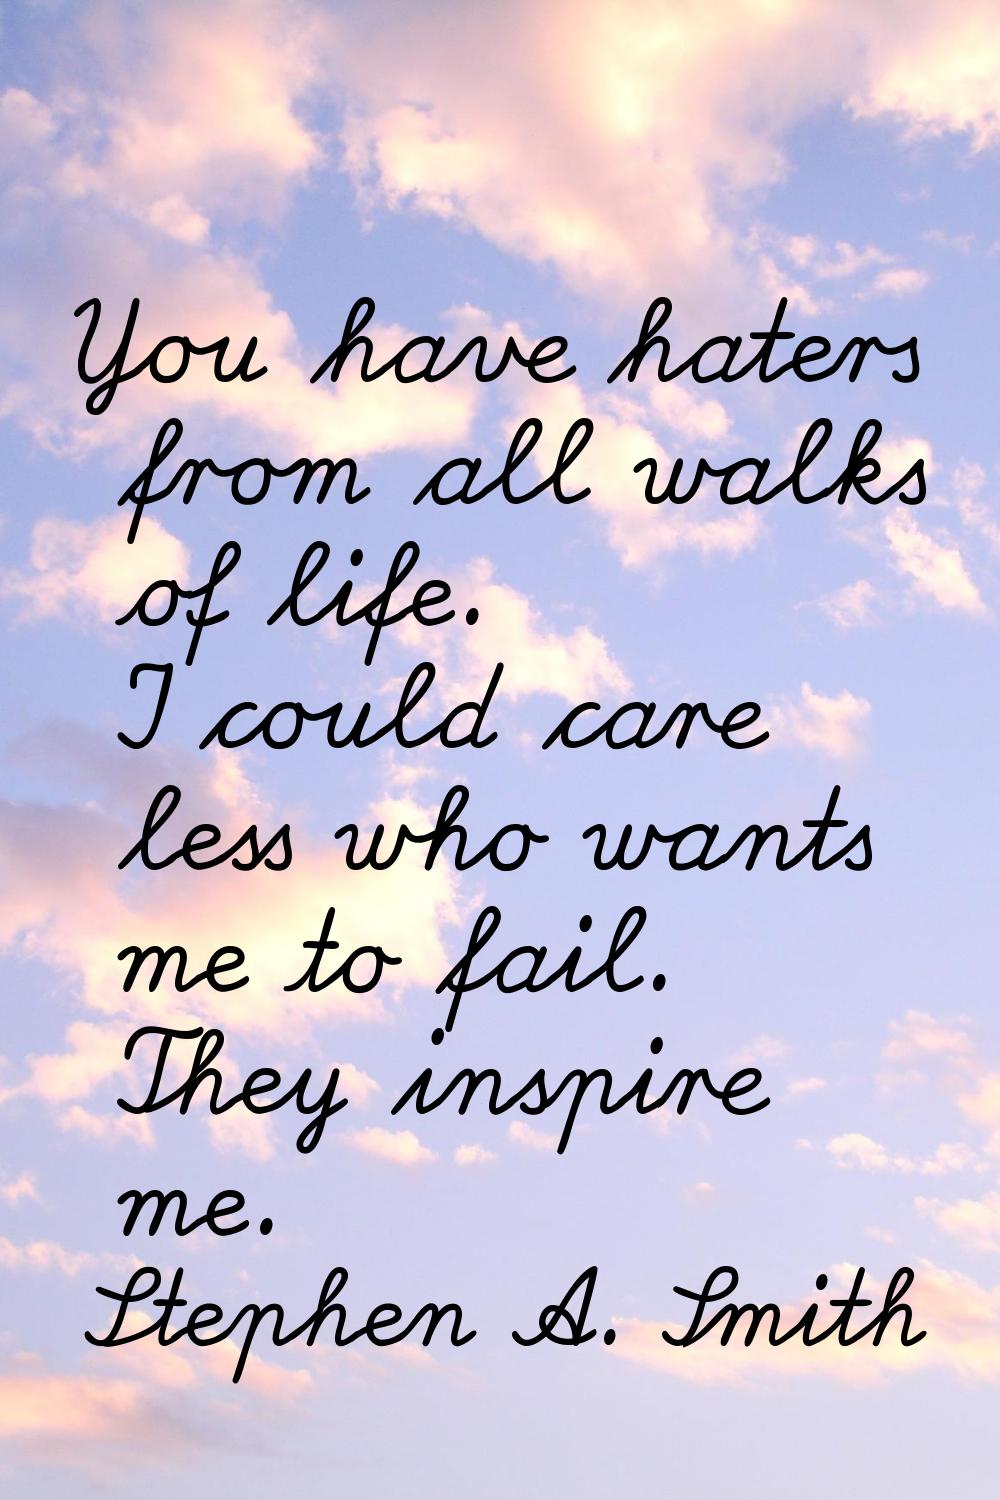 You have haters from all walks of life. I could care less who wants me to fail. They inspire me.